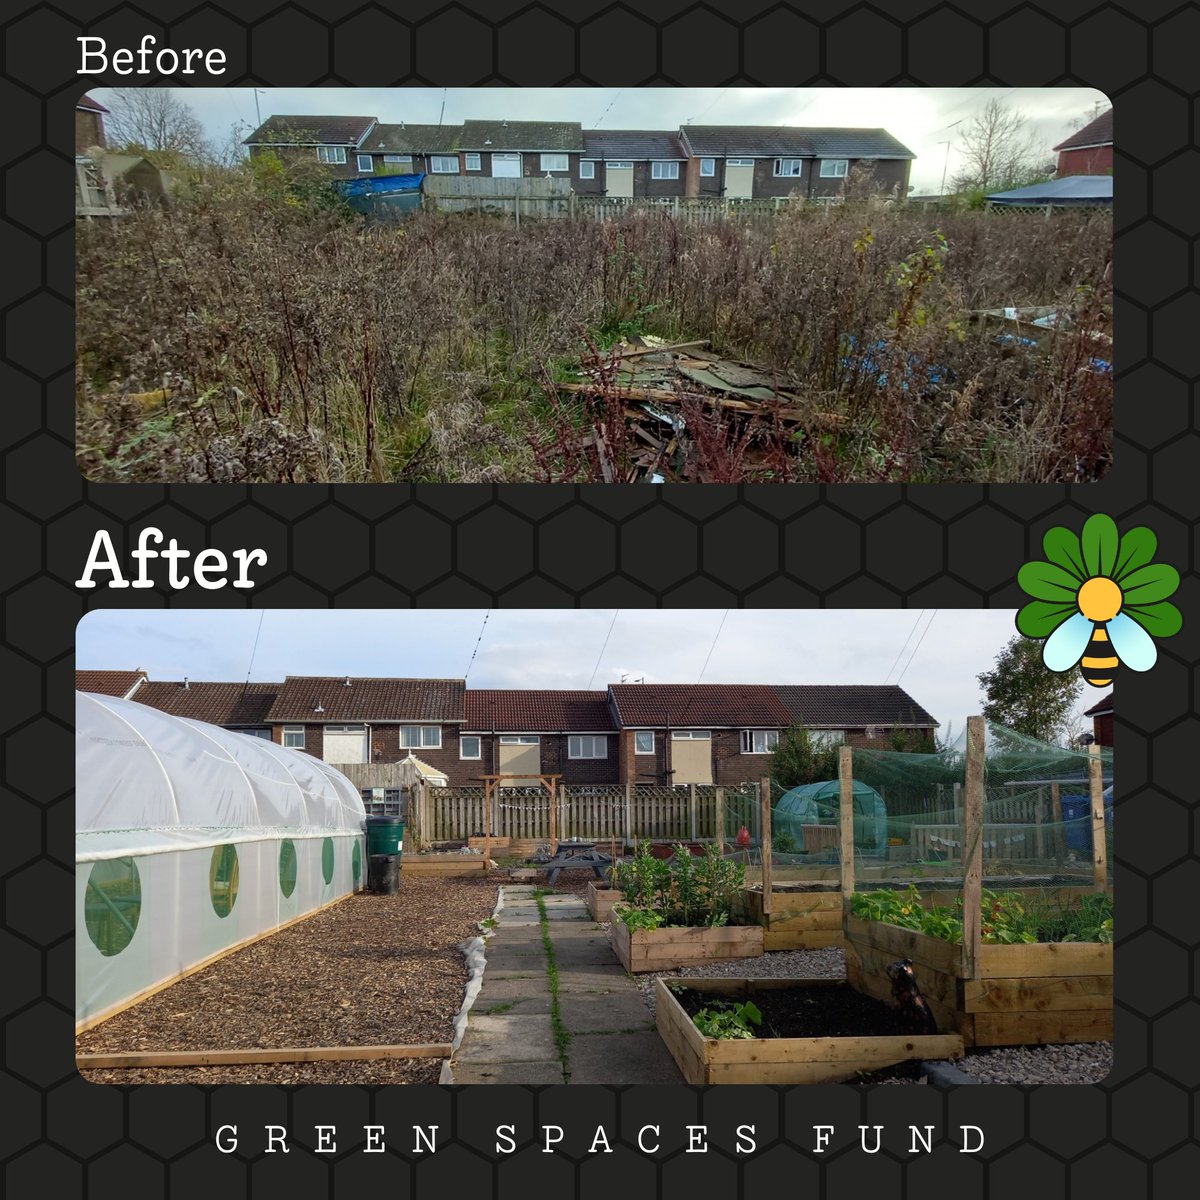 Our Green Spaces Fund is helping community groups right across Greater Manchester create vibrant local green spaces where they are needed most. Check out the incredible transformation at the Vitality Gardens project in @TamesideCouncil 💚 #GMGreenCity #GreenSpacesFund